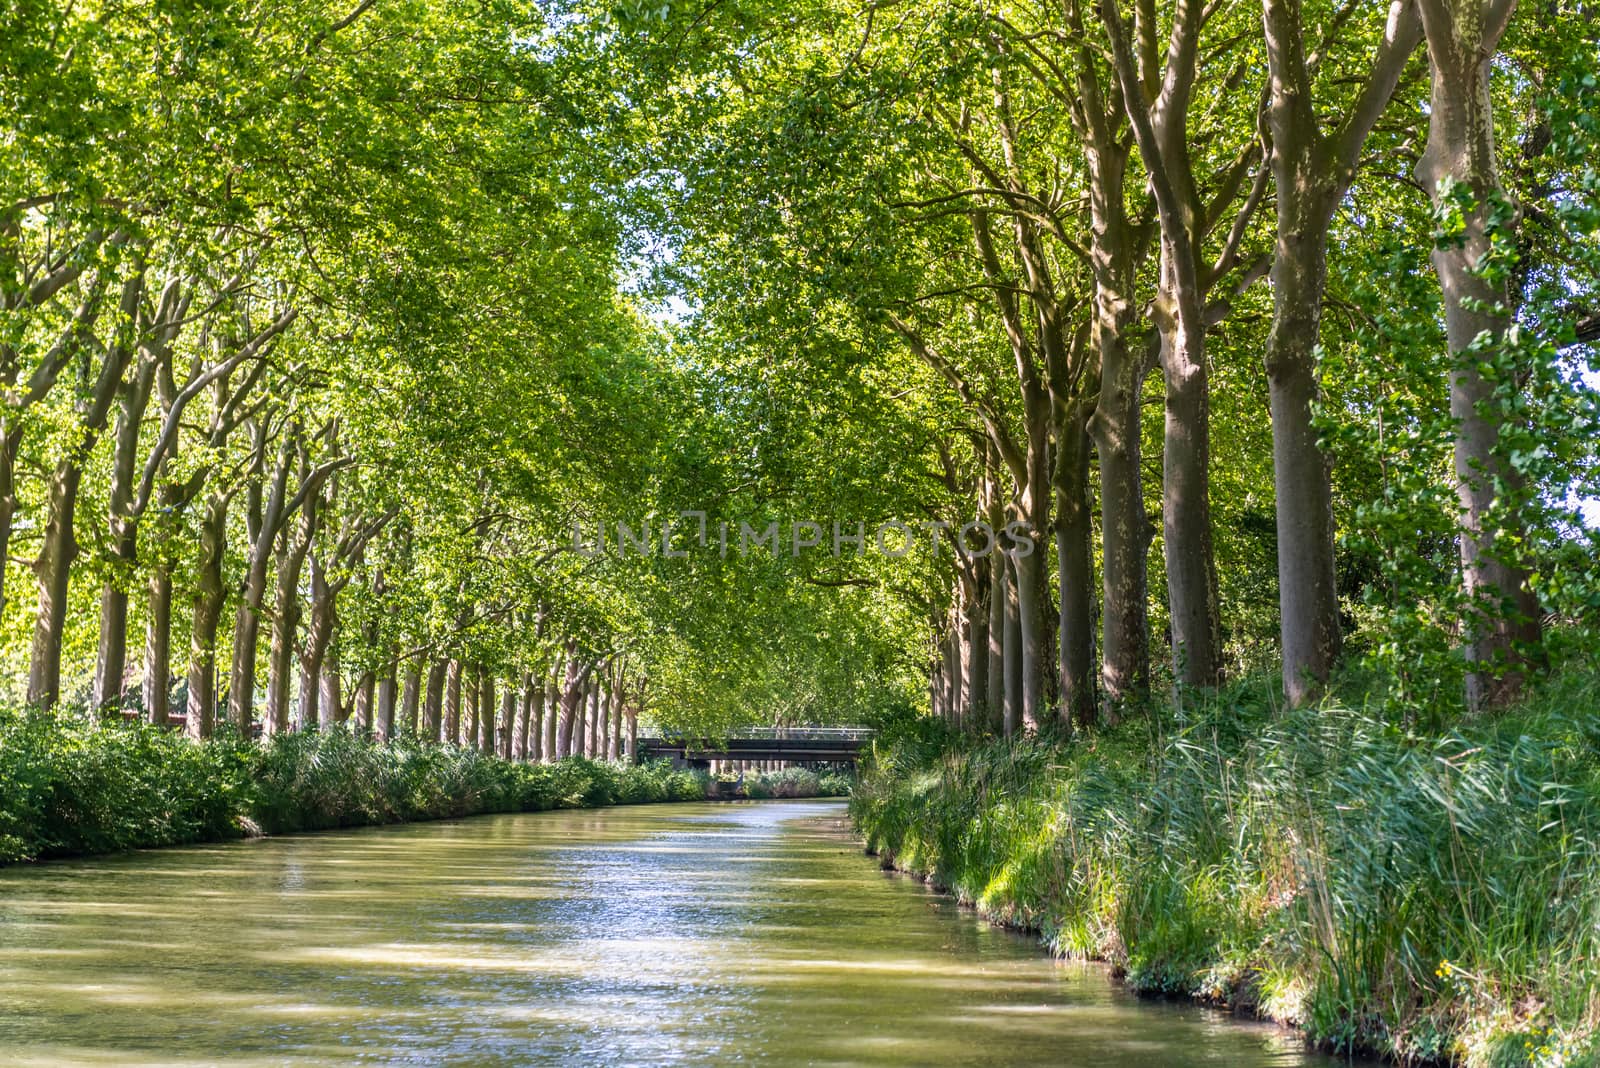 Summer look on Canal du Midi canal in Toulouse, southern Franc by rayints